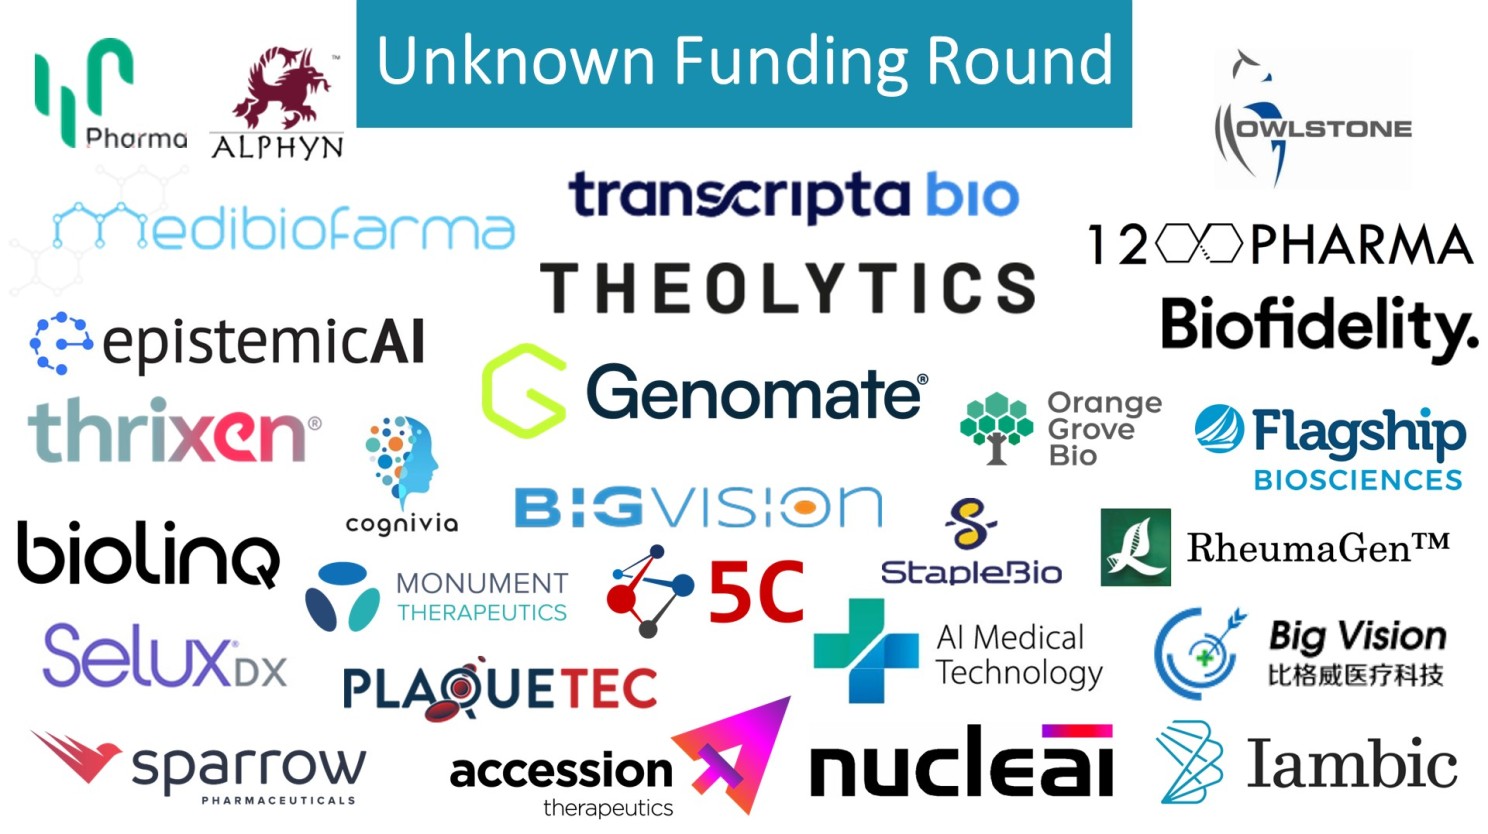 other unknown funding rounds